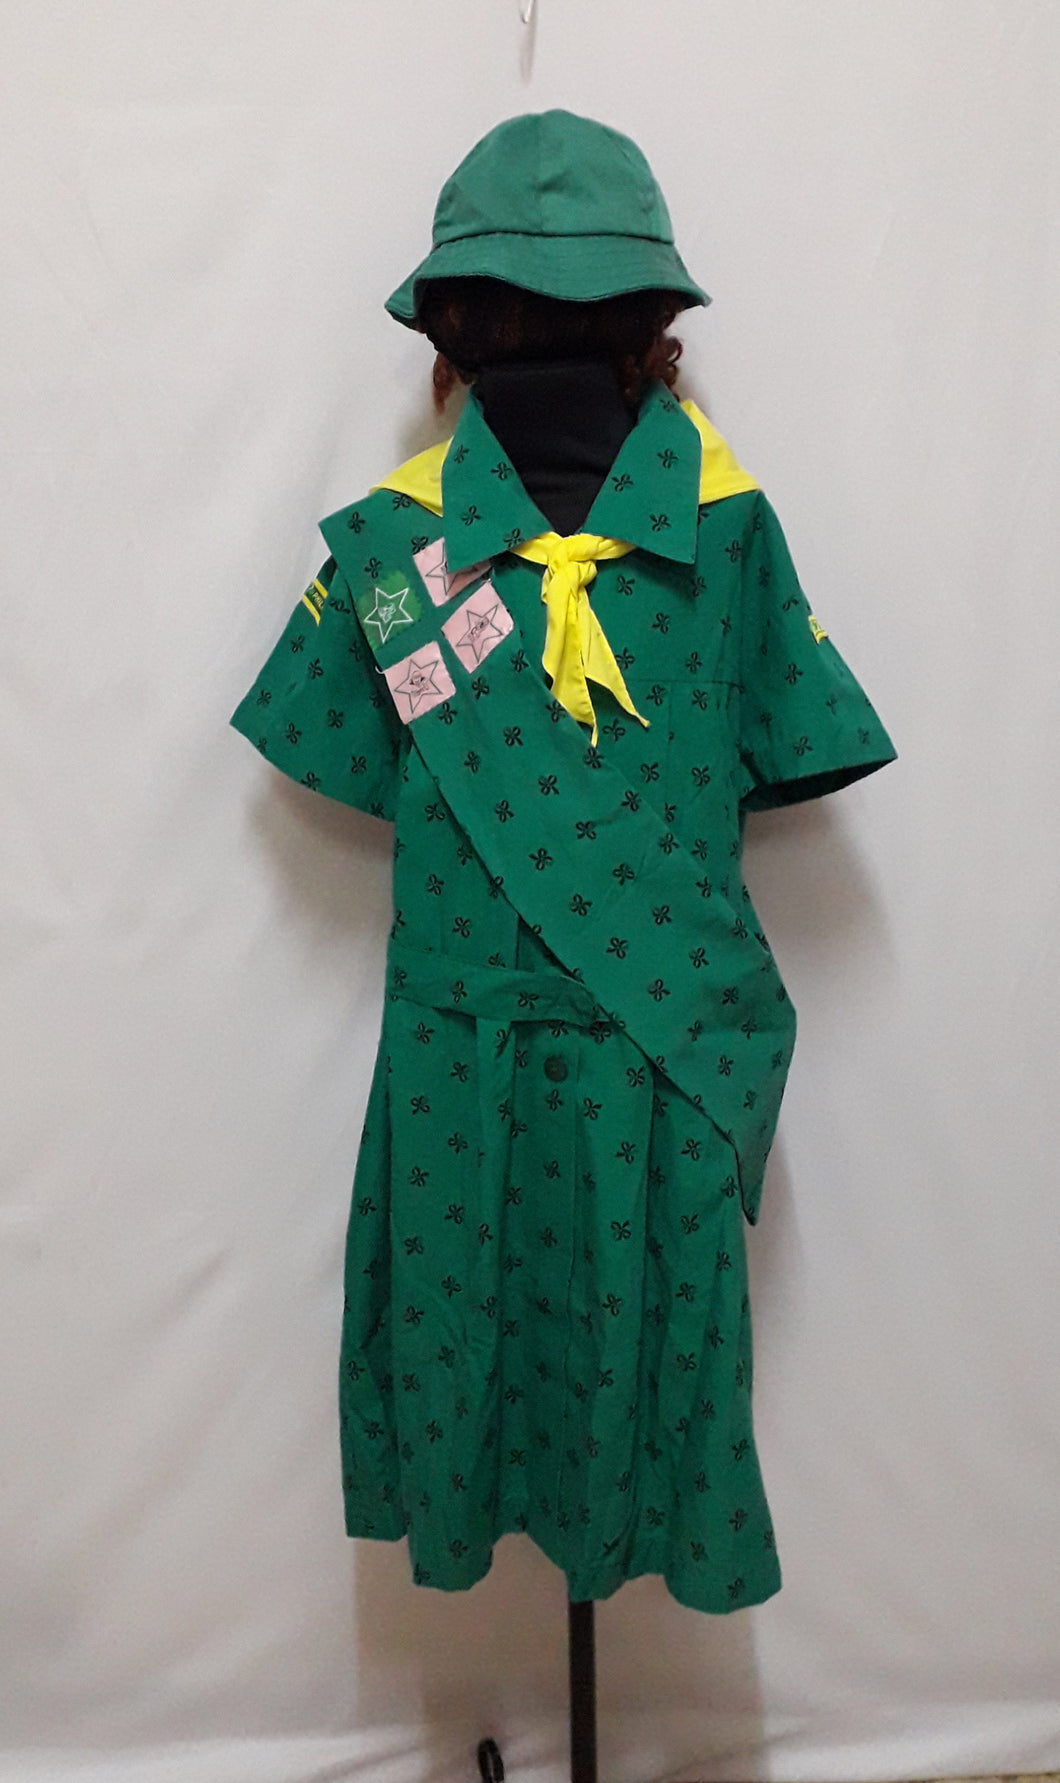 Girl Scout Costume